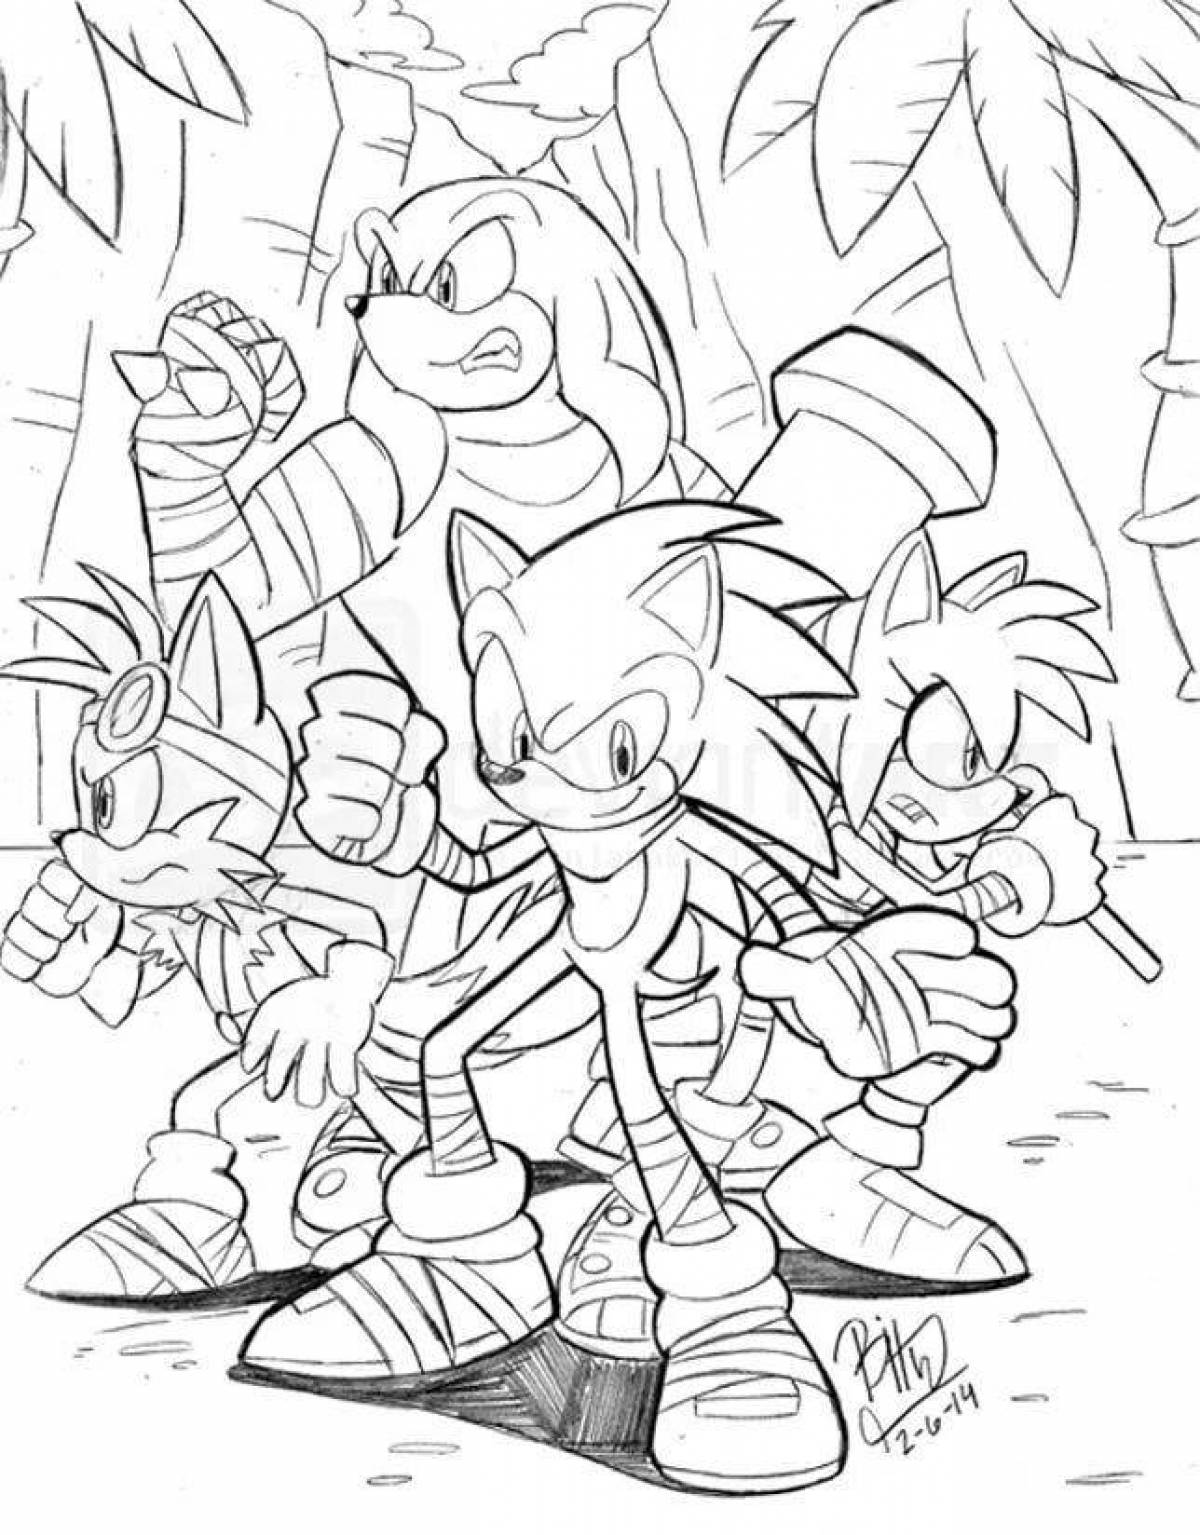 Adorable sonic coloring pages